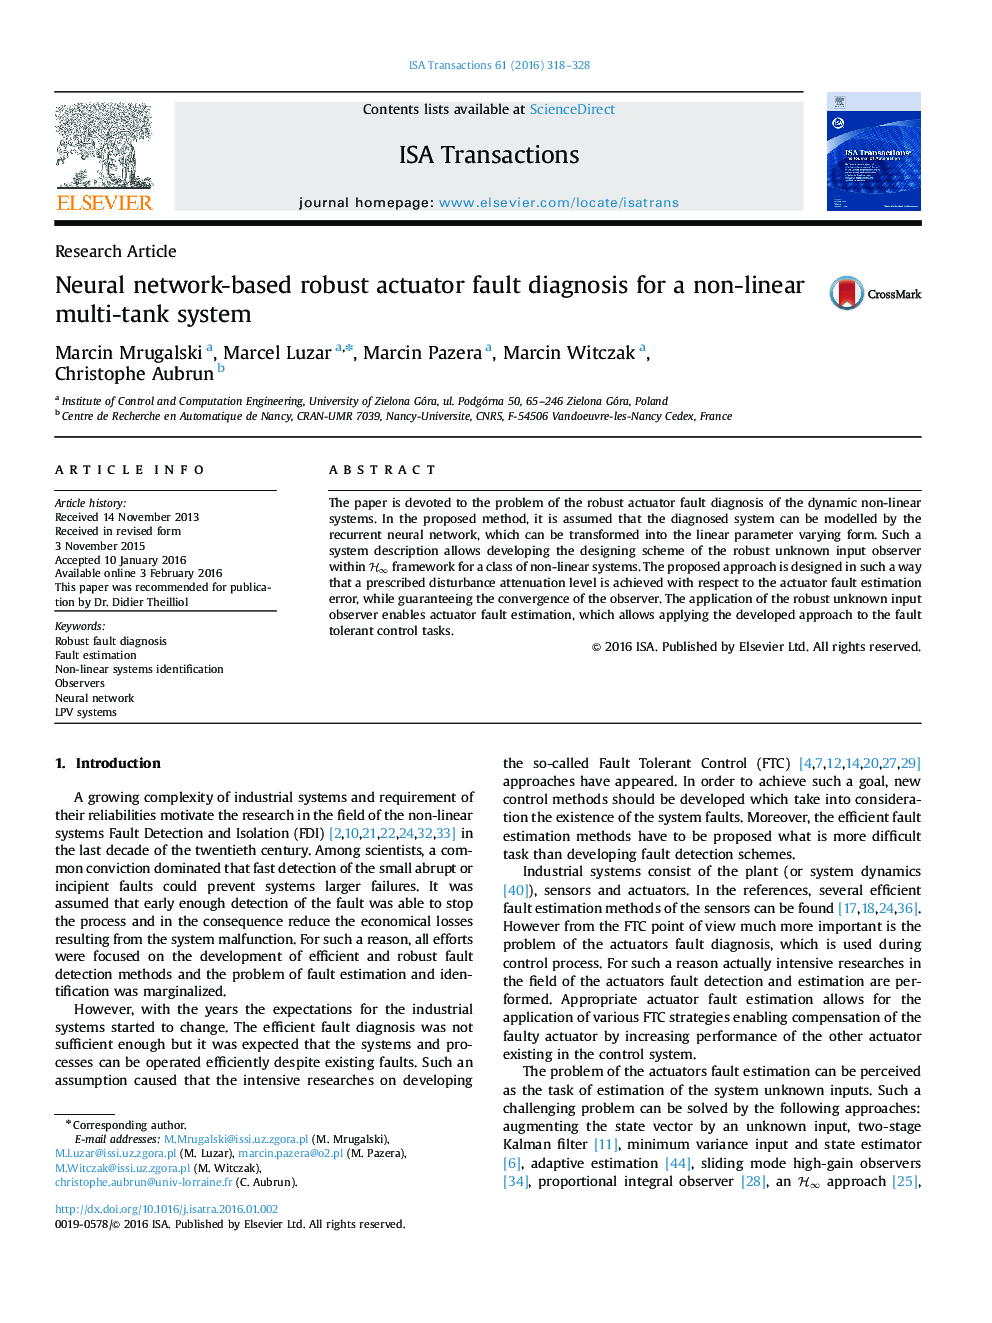 Research ArticleNeural network-based robust actuator fault diagnosis for a non-linear multi-tank system